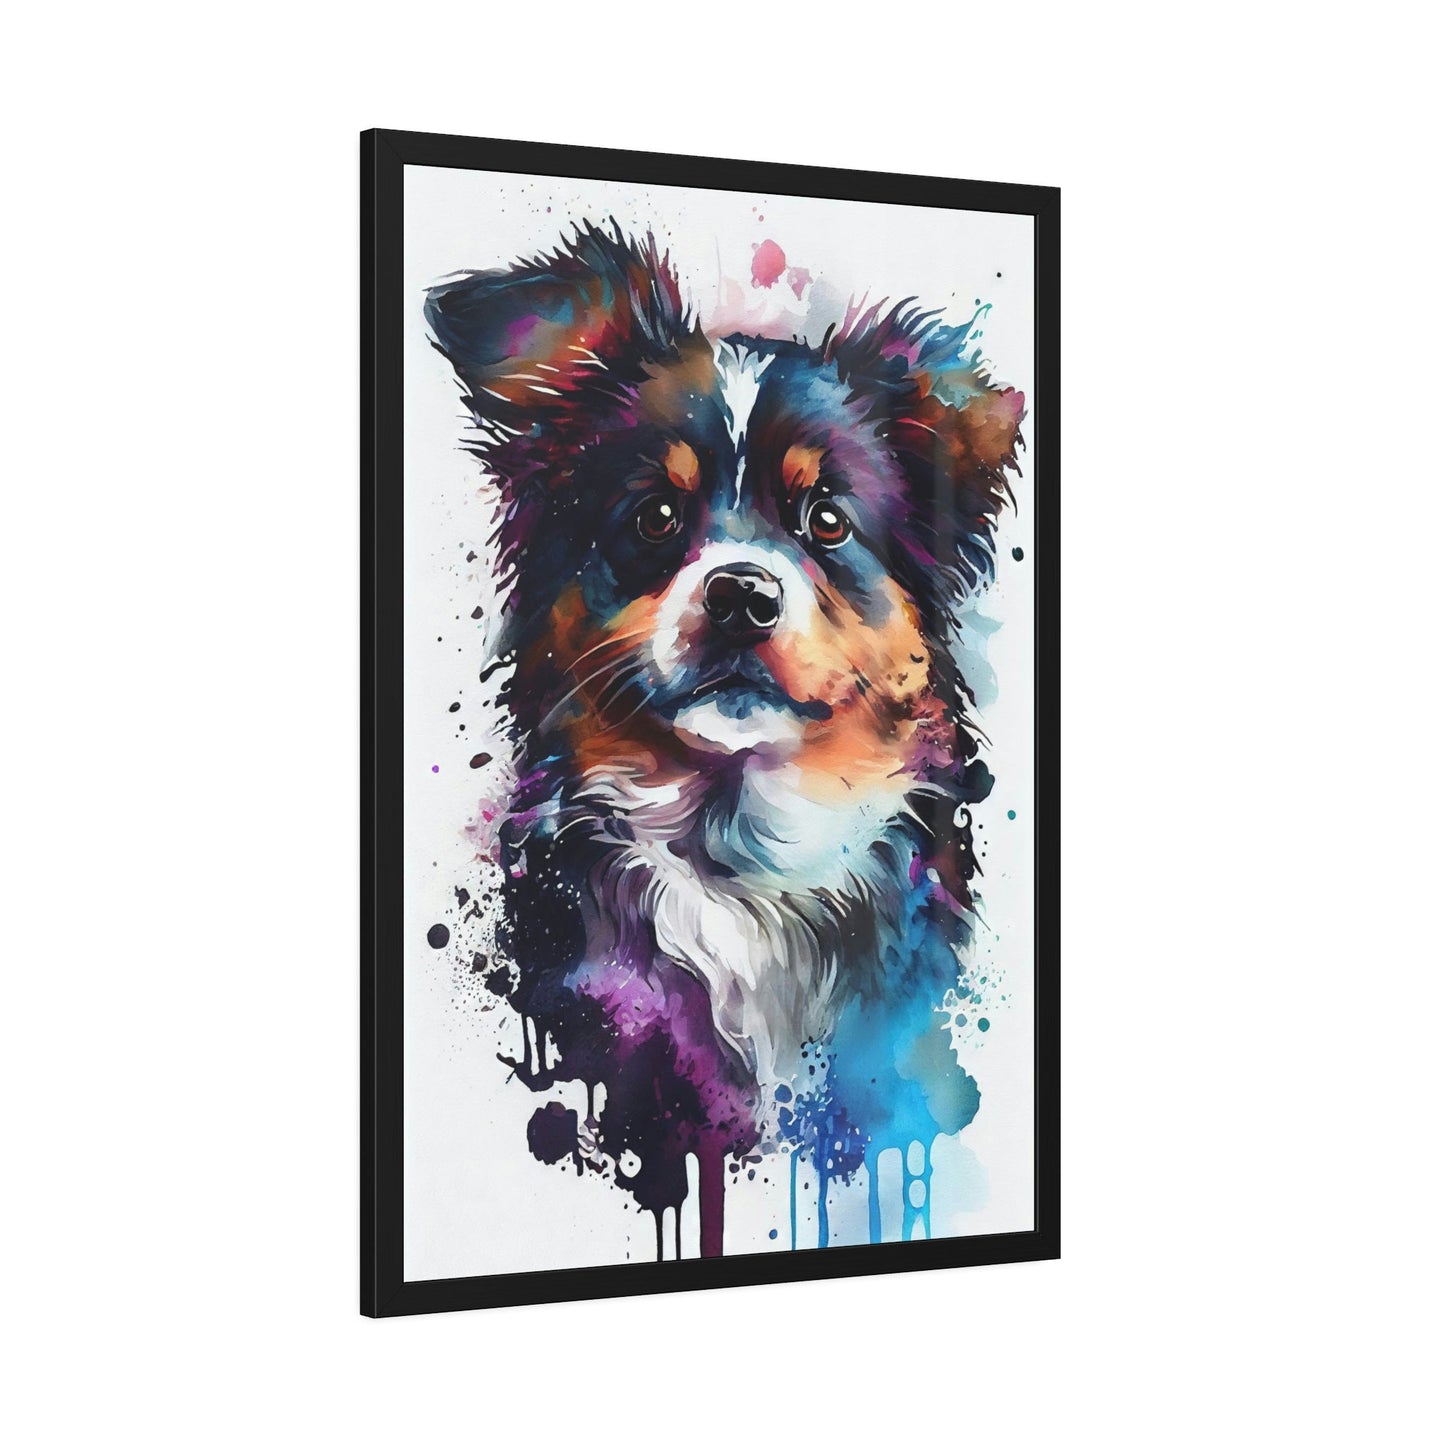 Dog's Life: Framed Poster of a Happy Pup on Canvas